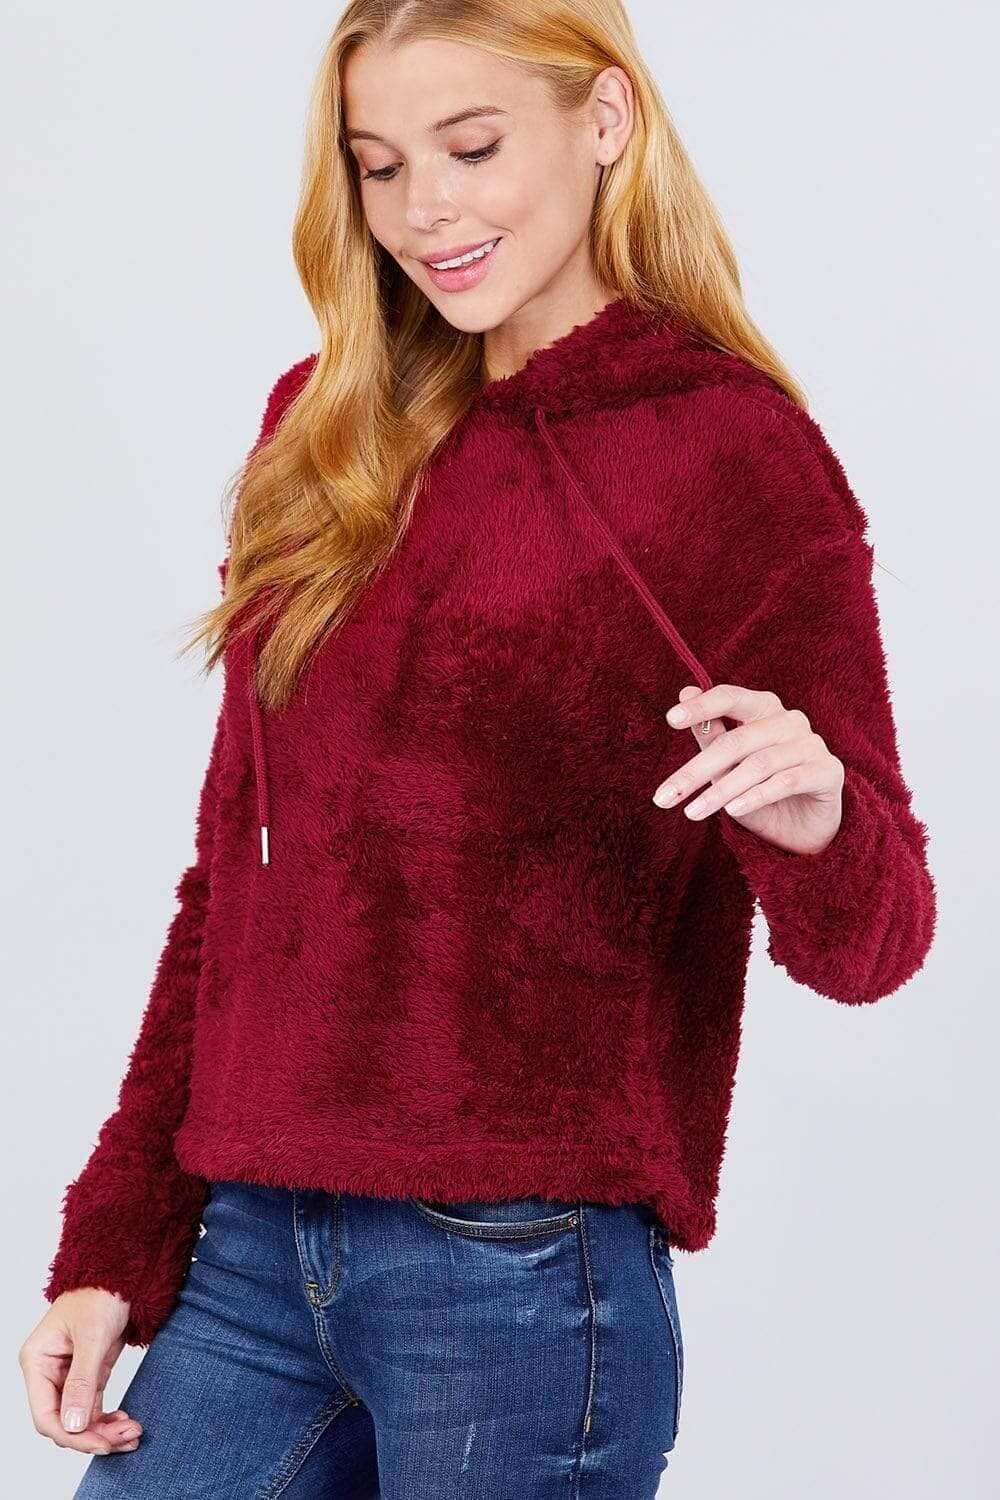 Burgundy Long Sleeve Faux Fur Sweater - Shopping Therapy M Sweater